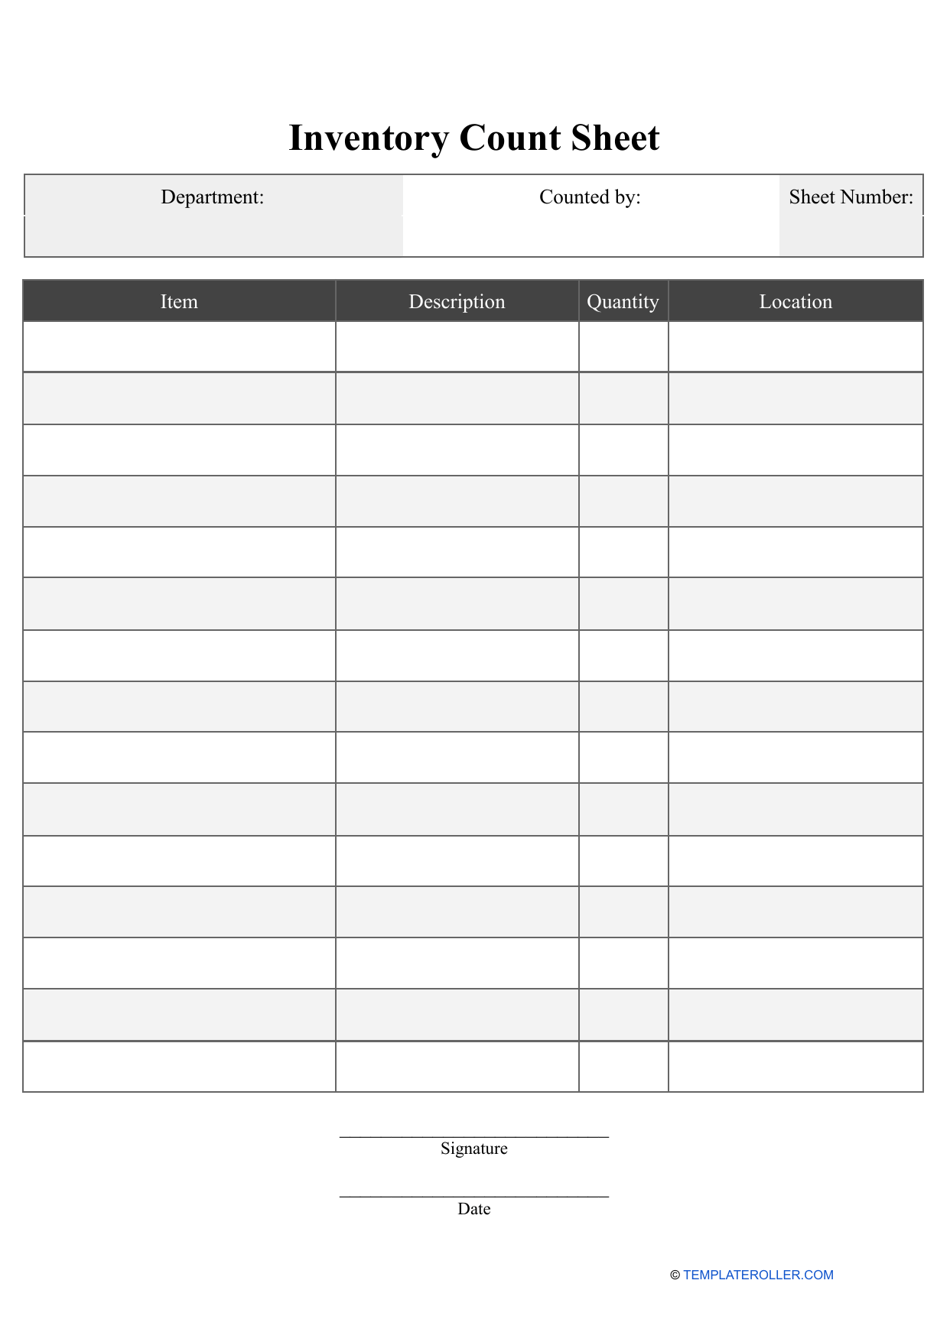 Inventory Count Sheet Template - Big Table, Page 1